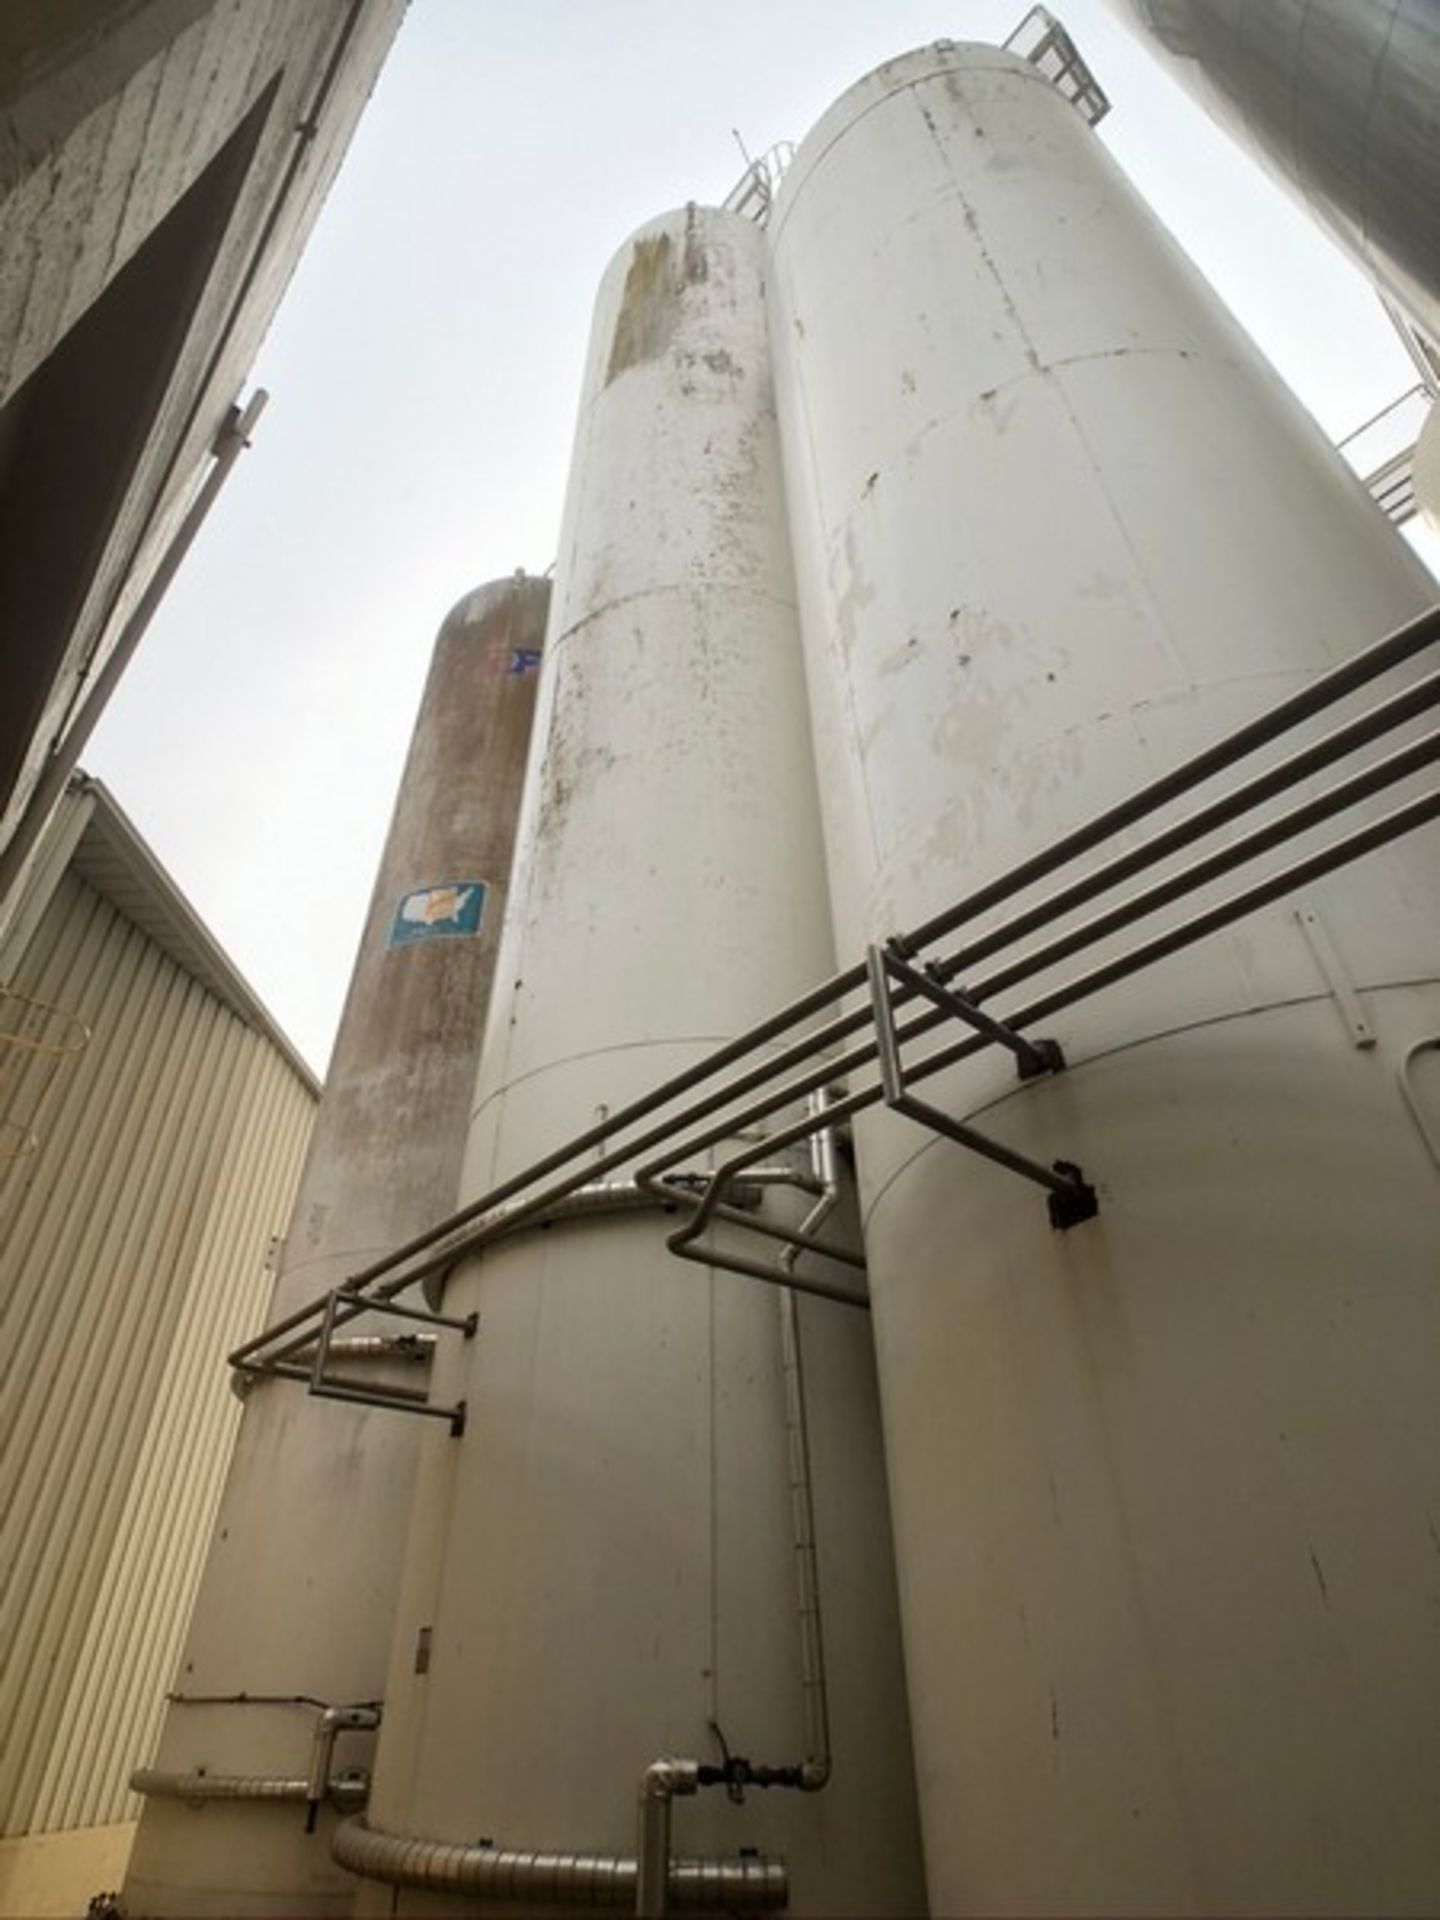 MUELLER 60,000 GALLON JACKETED SILO, S/N 110549, HORIZONTAL AGITATION - Image 13 of 30